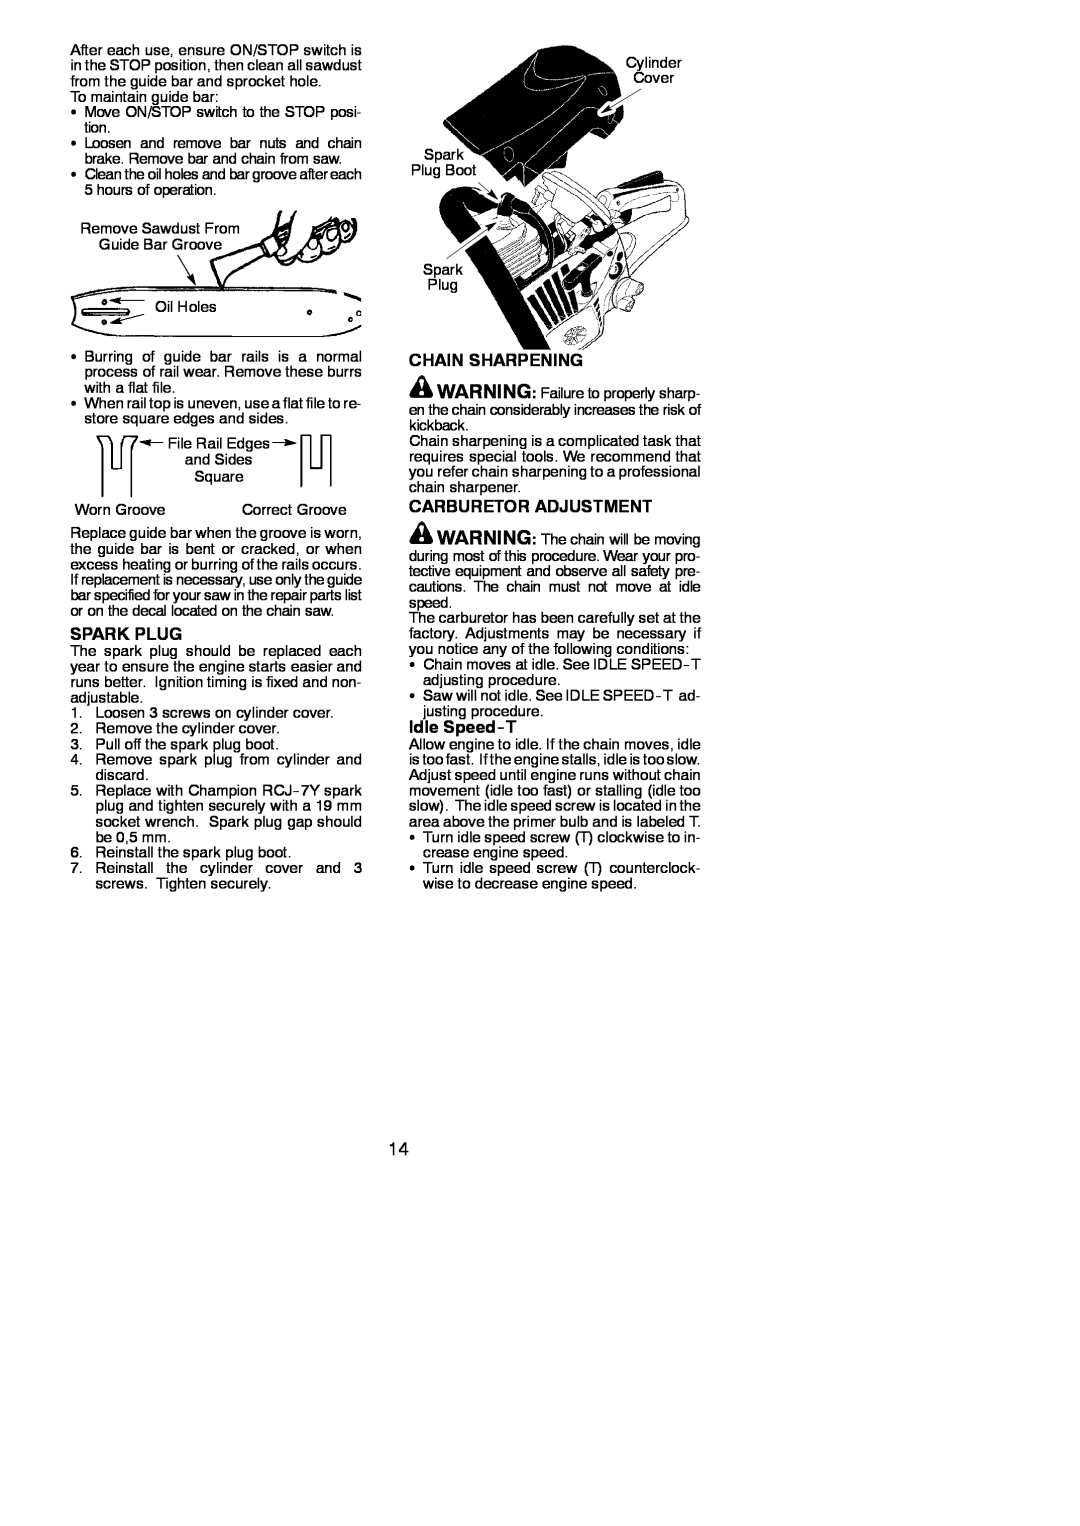 McCulloch Aug-42 instruction manual Spark Plug, Chain Sharpening, Carburetor Adjustment, Idle Speed--T 